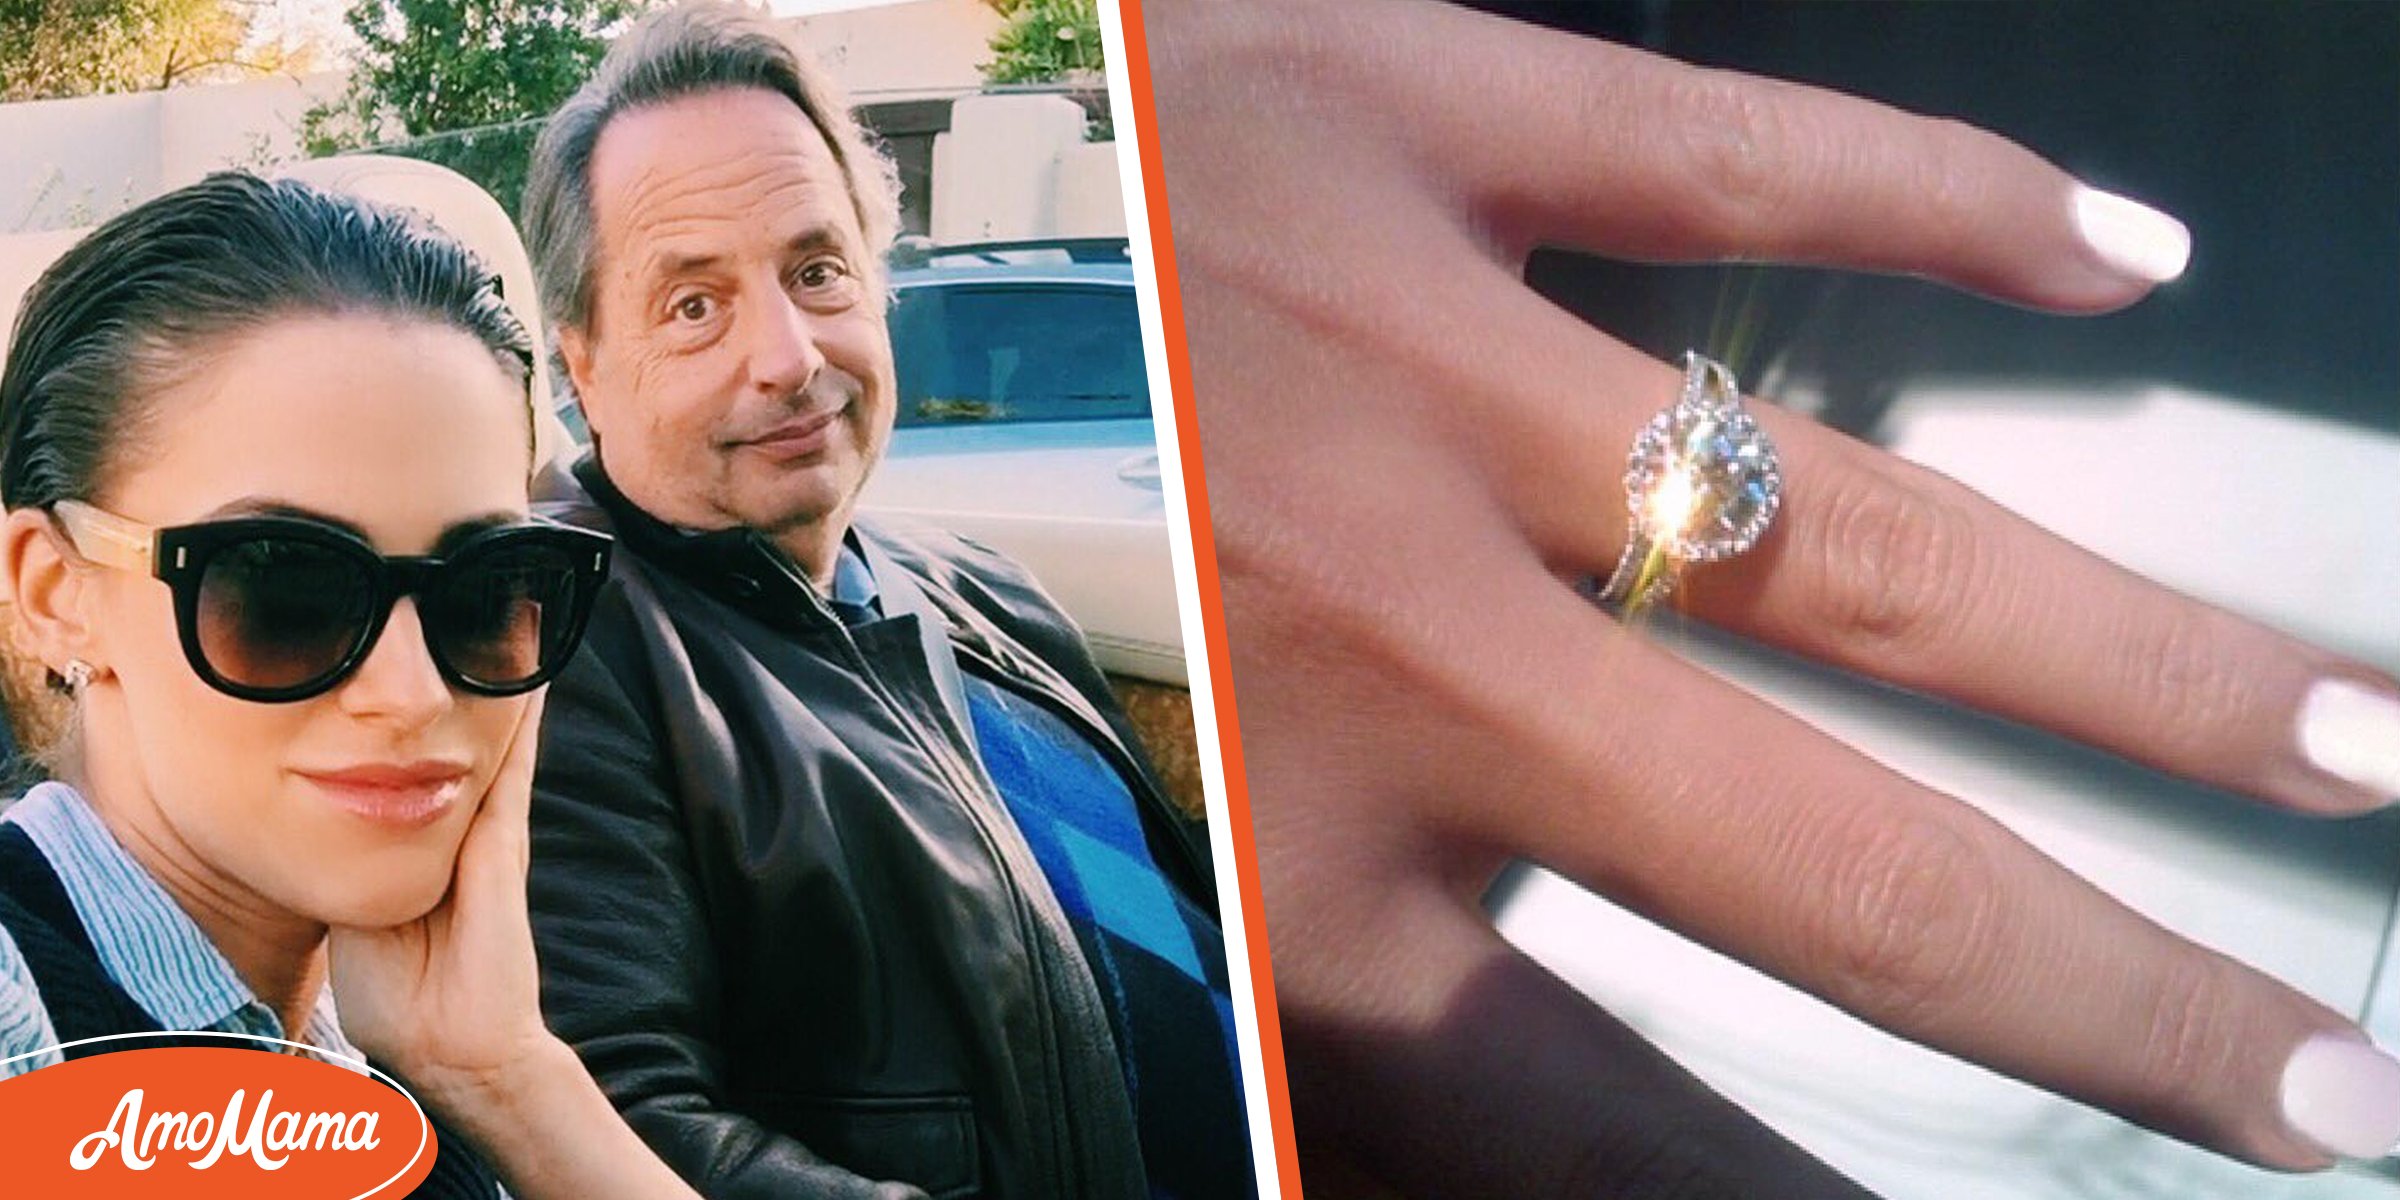 Is Jessica Lowndes Jon Lovitz's Wife? The Singer Posted Photo of a Ring